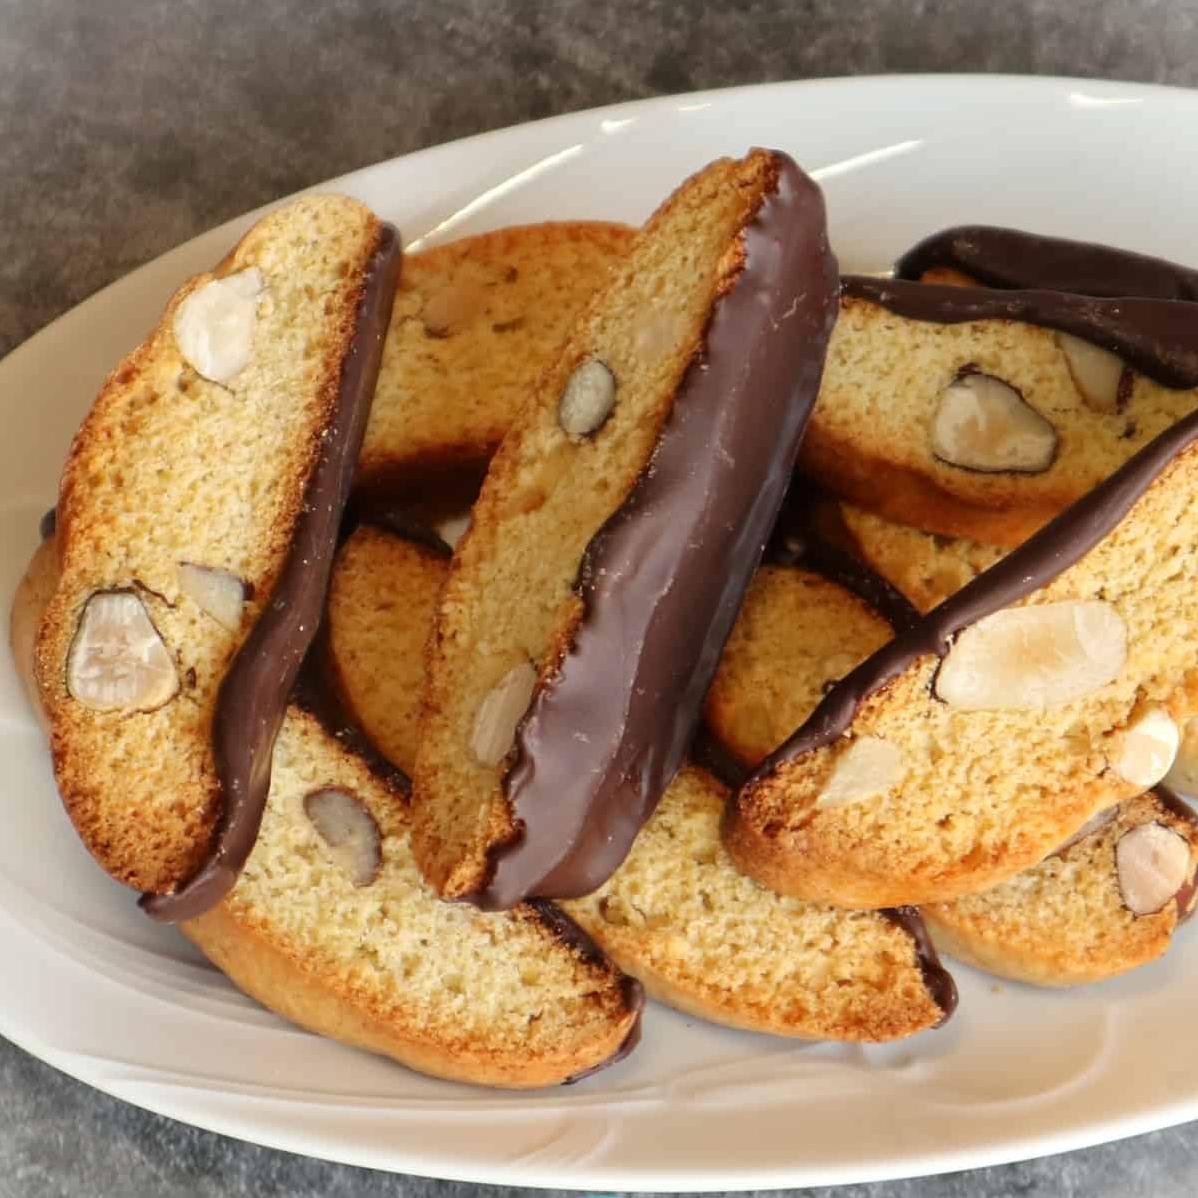  The aroma of coffee will fill your kitchen when you make these biscottis.